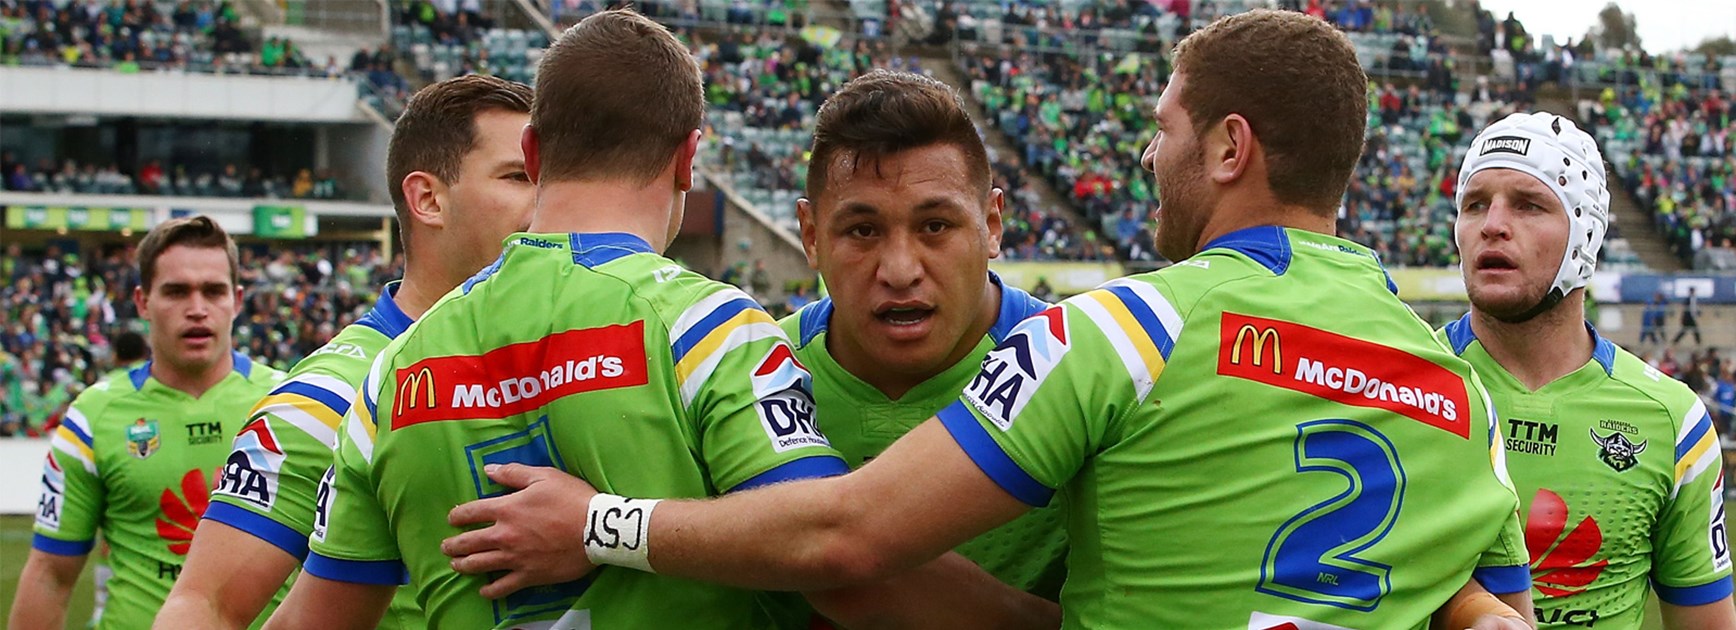 The Raiders celebrate a try against the Eels in Round 24.